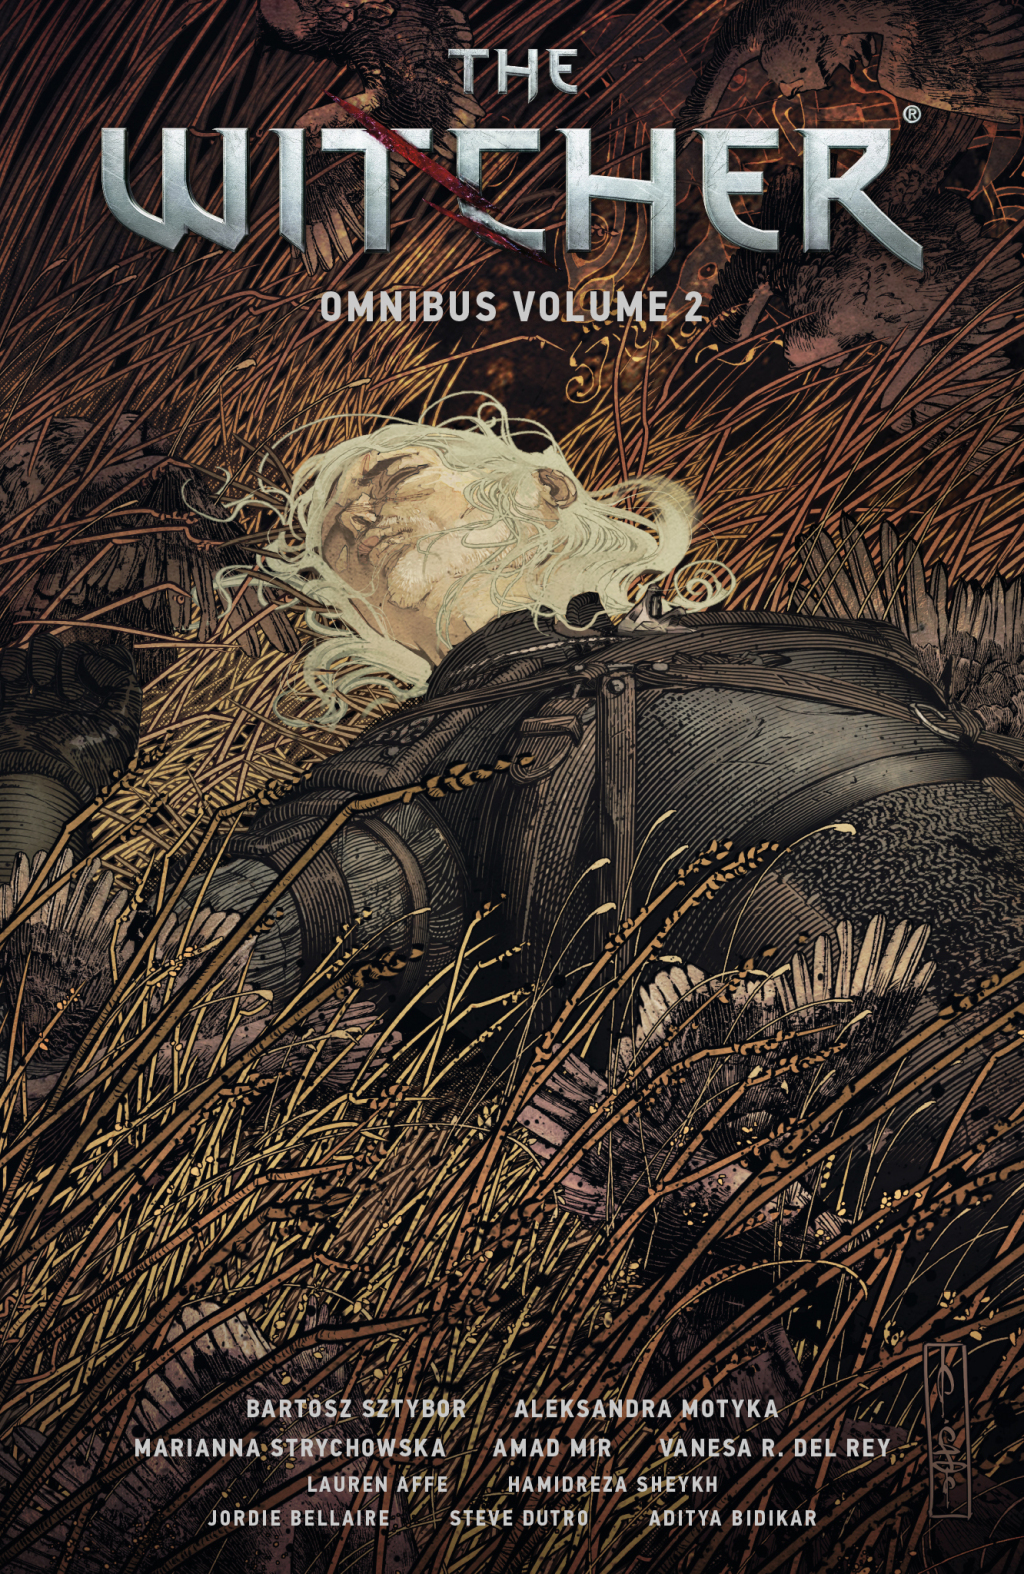 ISBN 9781506726922 product image for The Witcher Omnibus Volume 2 (eBook) | upcitemdb.com